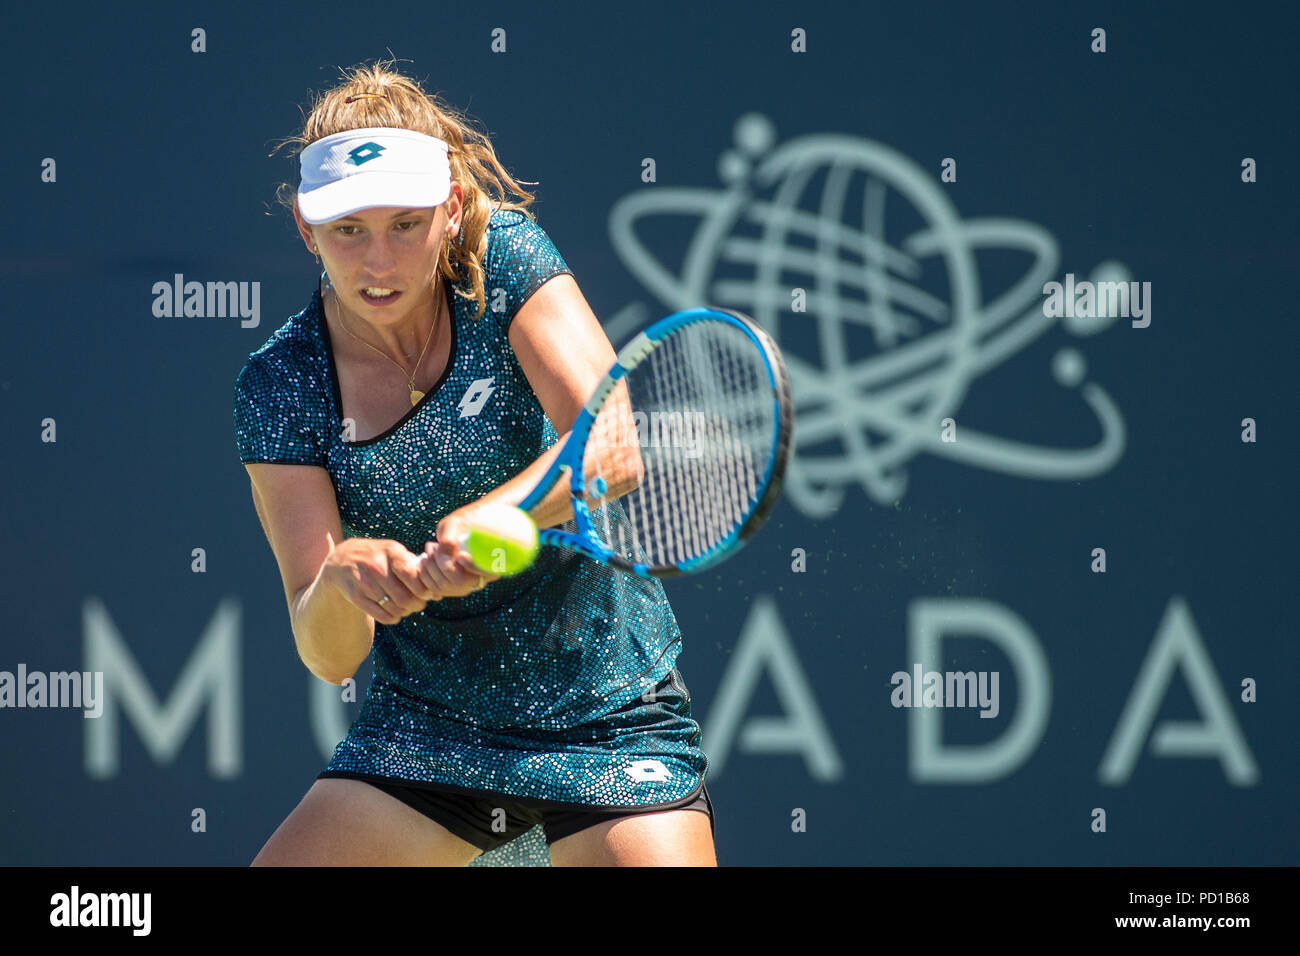 California, USA. 4 August 2018. Elise Mertens (BEL) was defeated by Mihaela  Buzarnescu (ROU) 6-4, 3-6, 6-1 in the semifinals of the Mubadala Silicon  Valley Classic at San Jose State University in